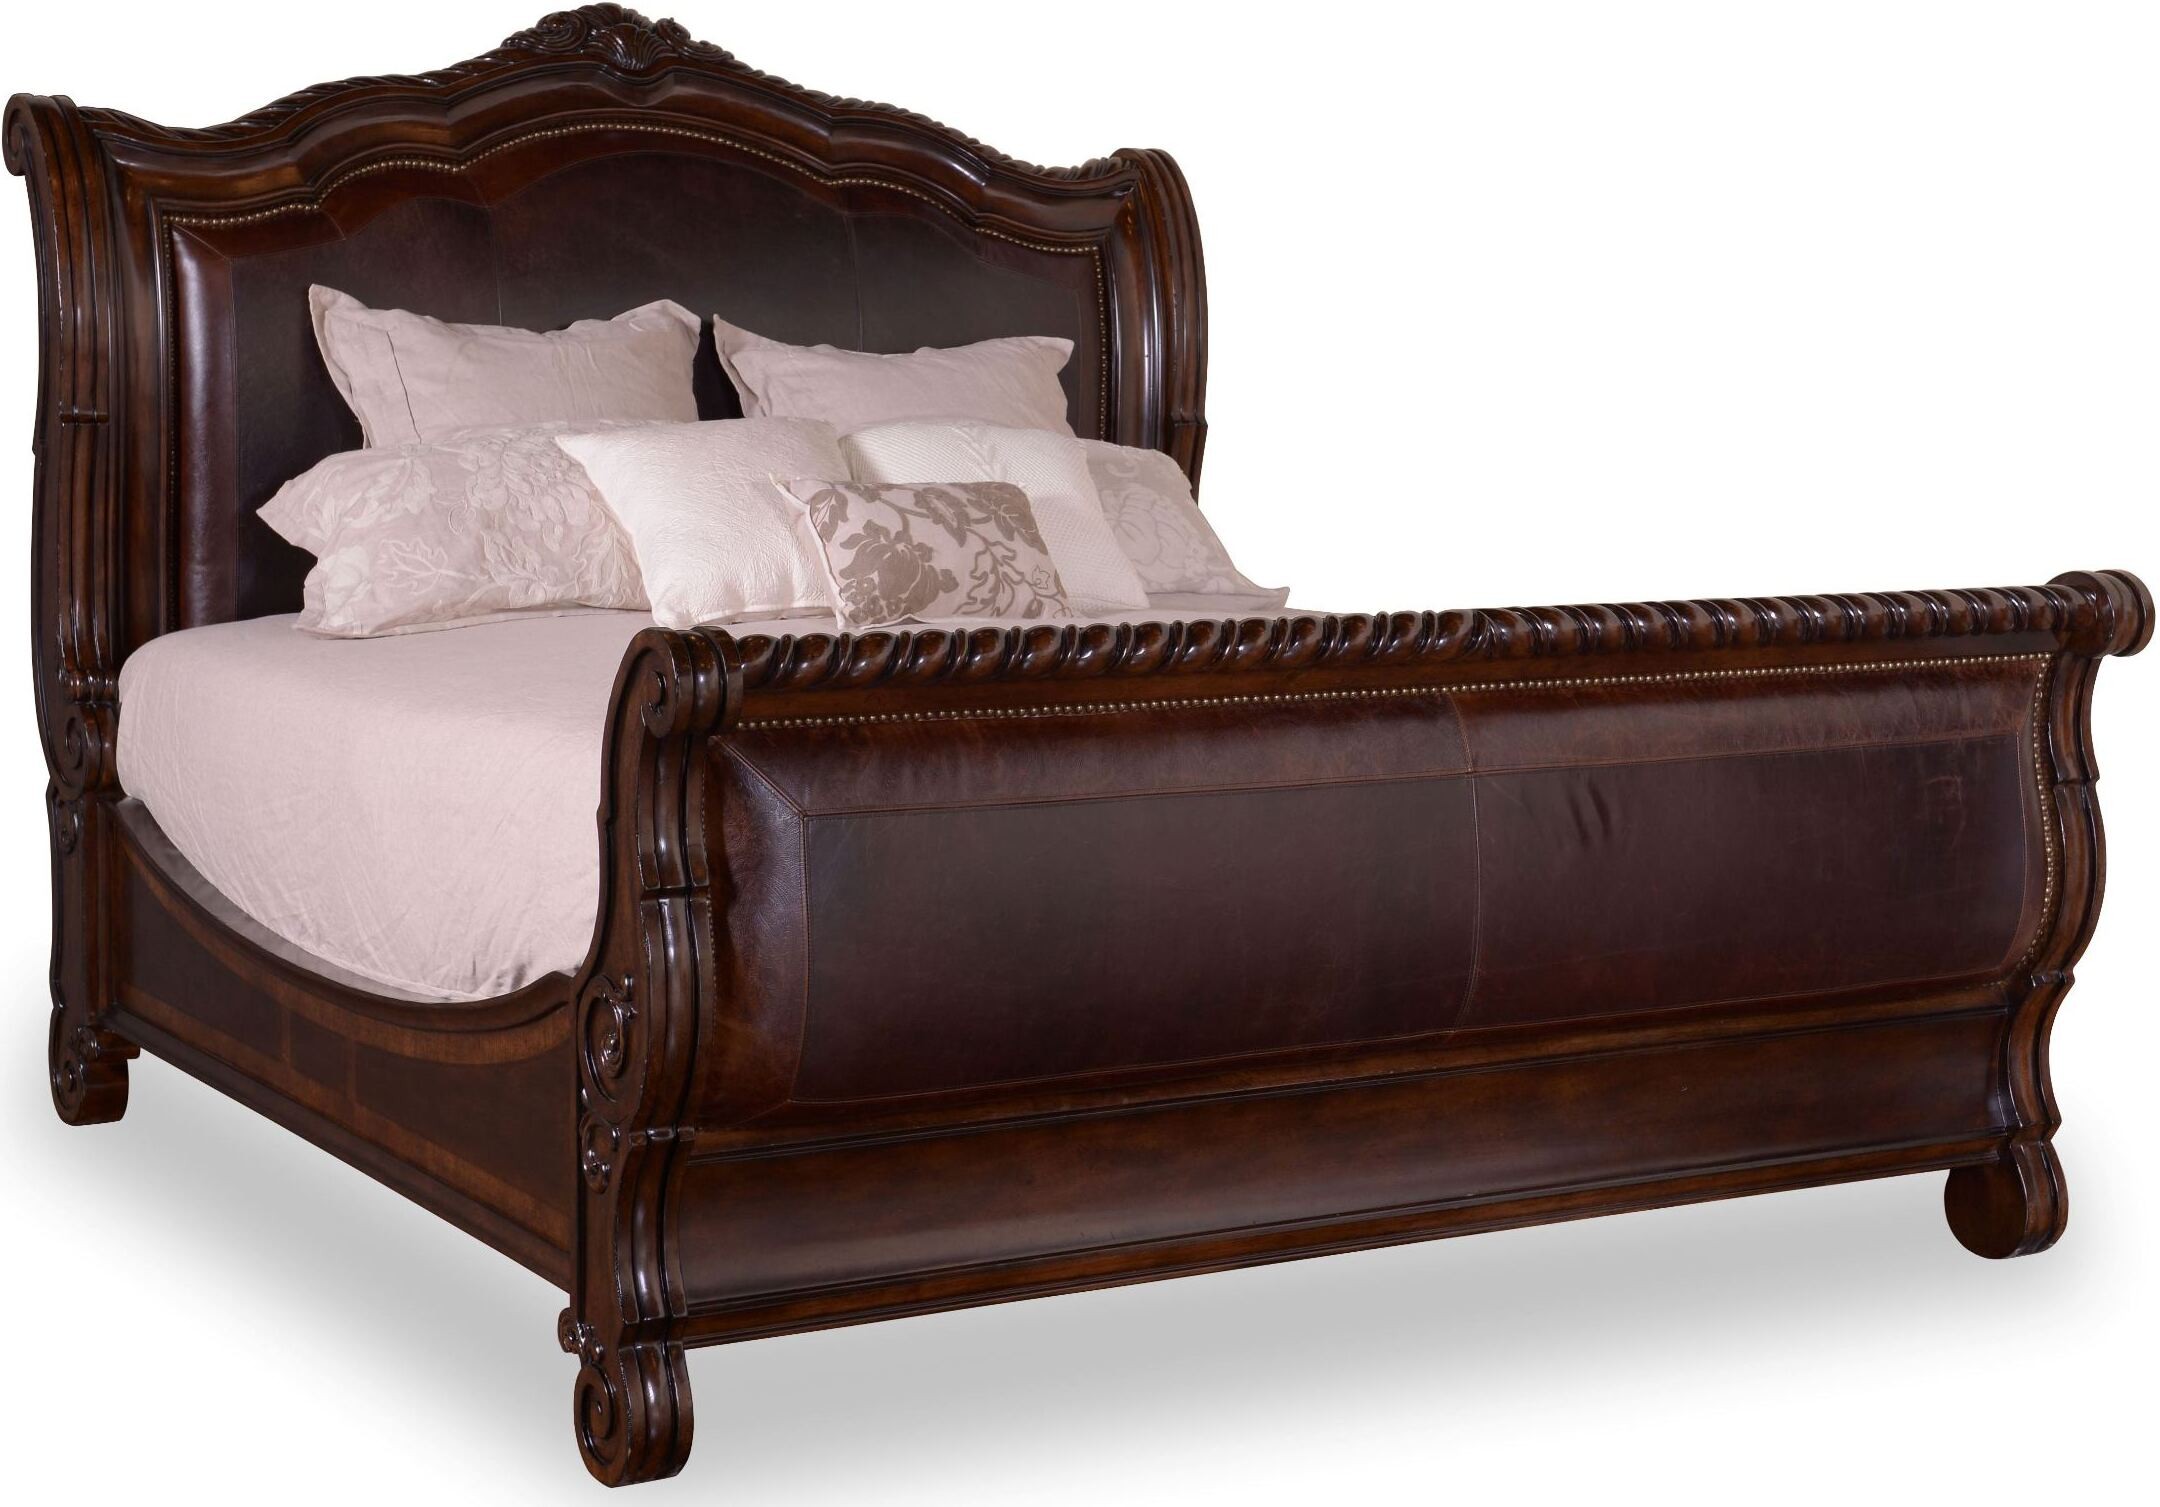 Valencia King Upholstered Sleigh Bed, Lafayette King Sleigh Bed